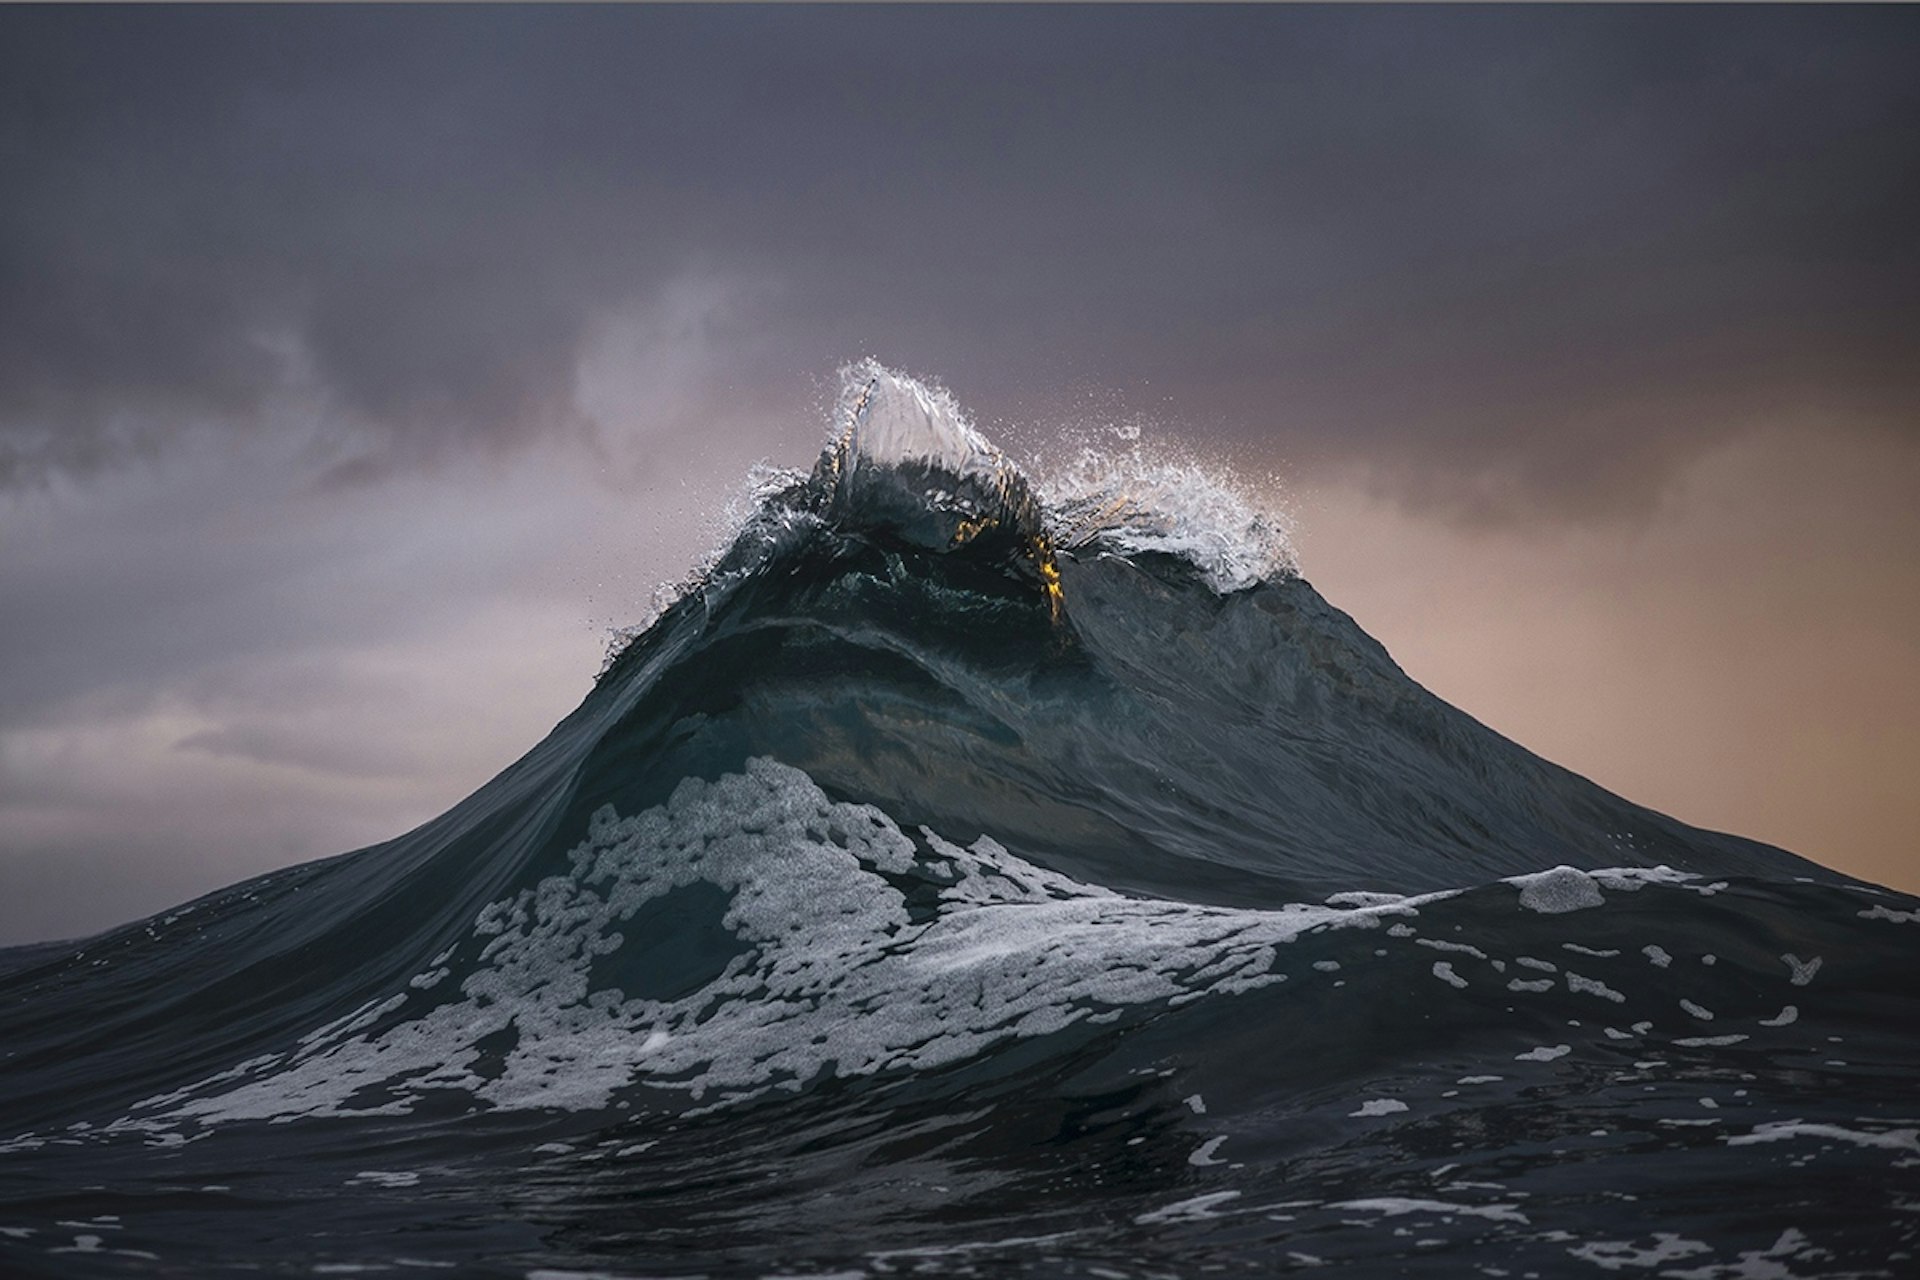 A day at sea with big wave photographer Ray Collins